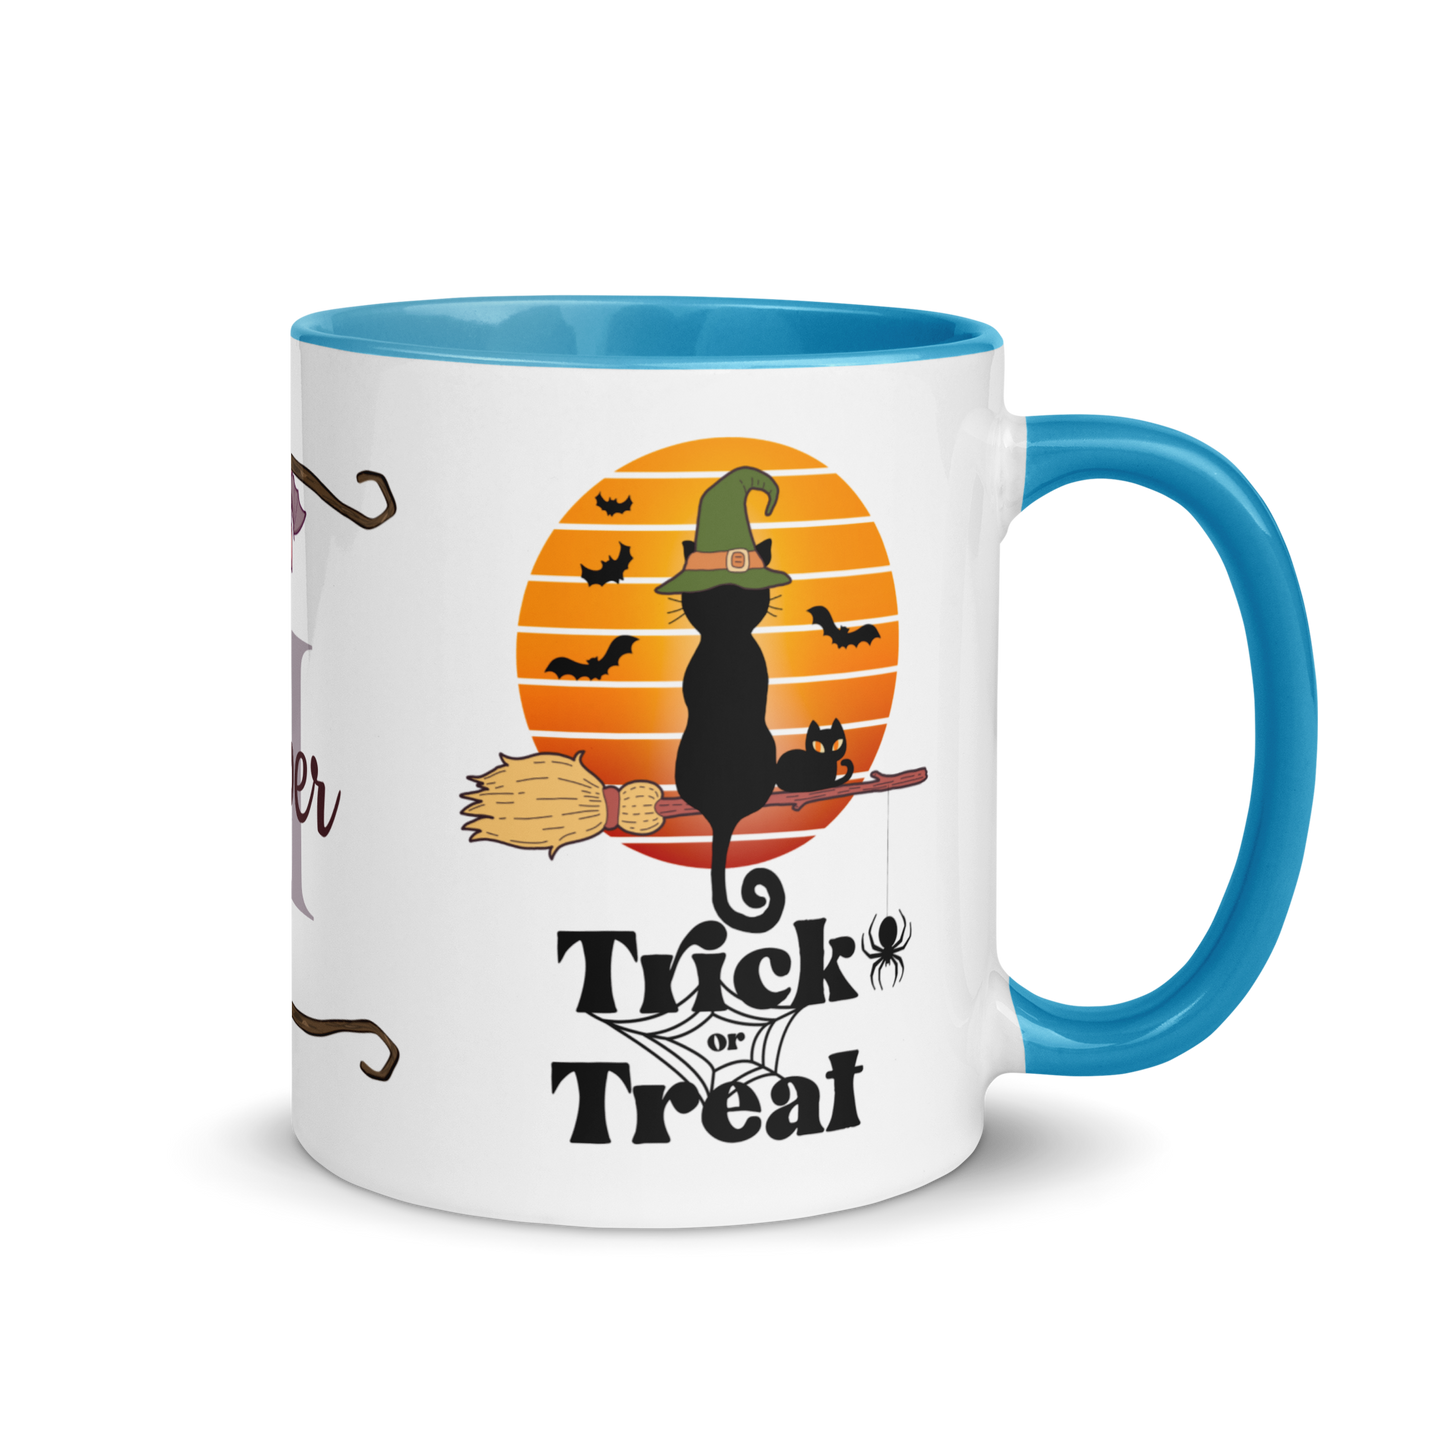 Personalized Coffee Mug 11oz | Trick or Treat Black Cat With Green Hat